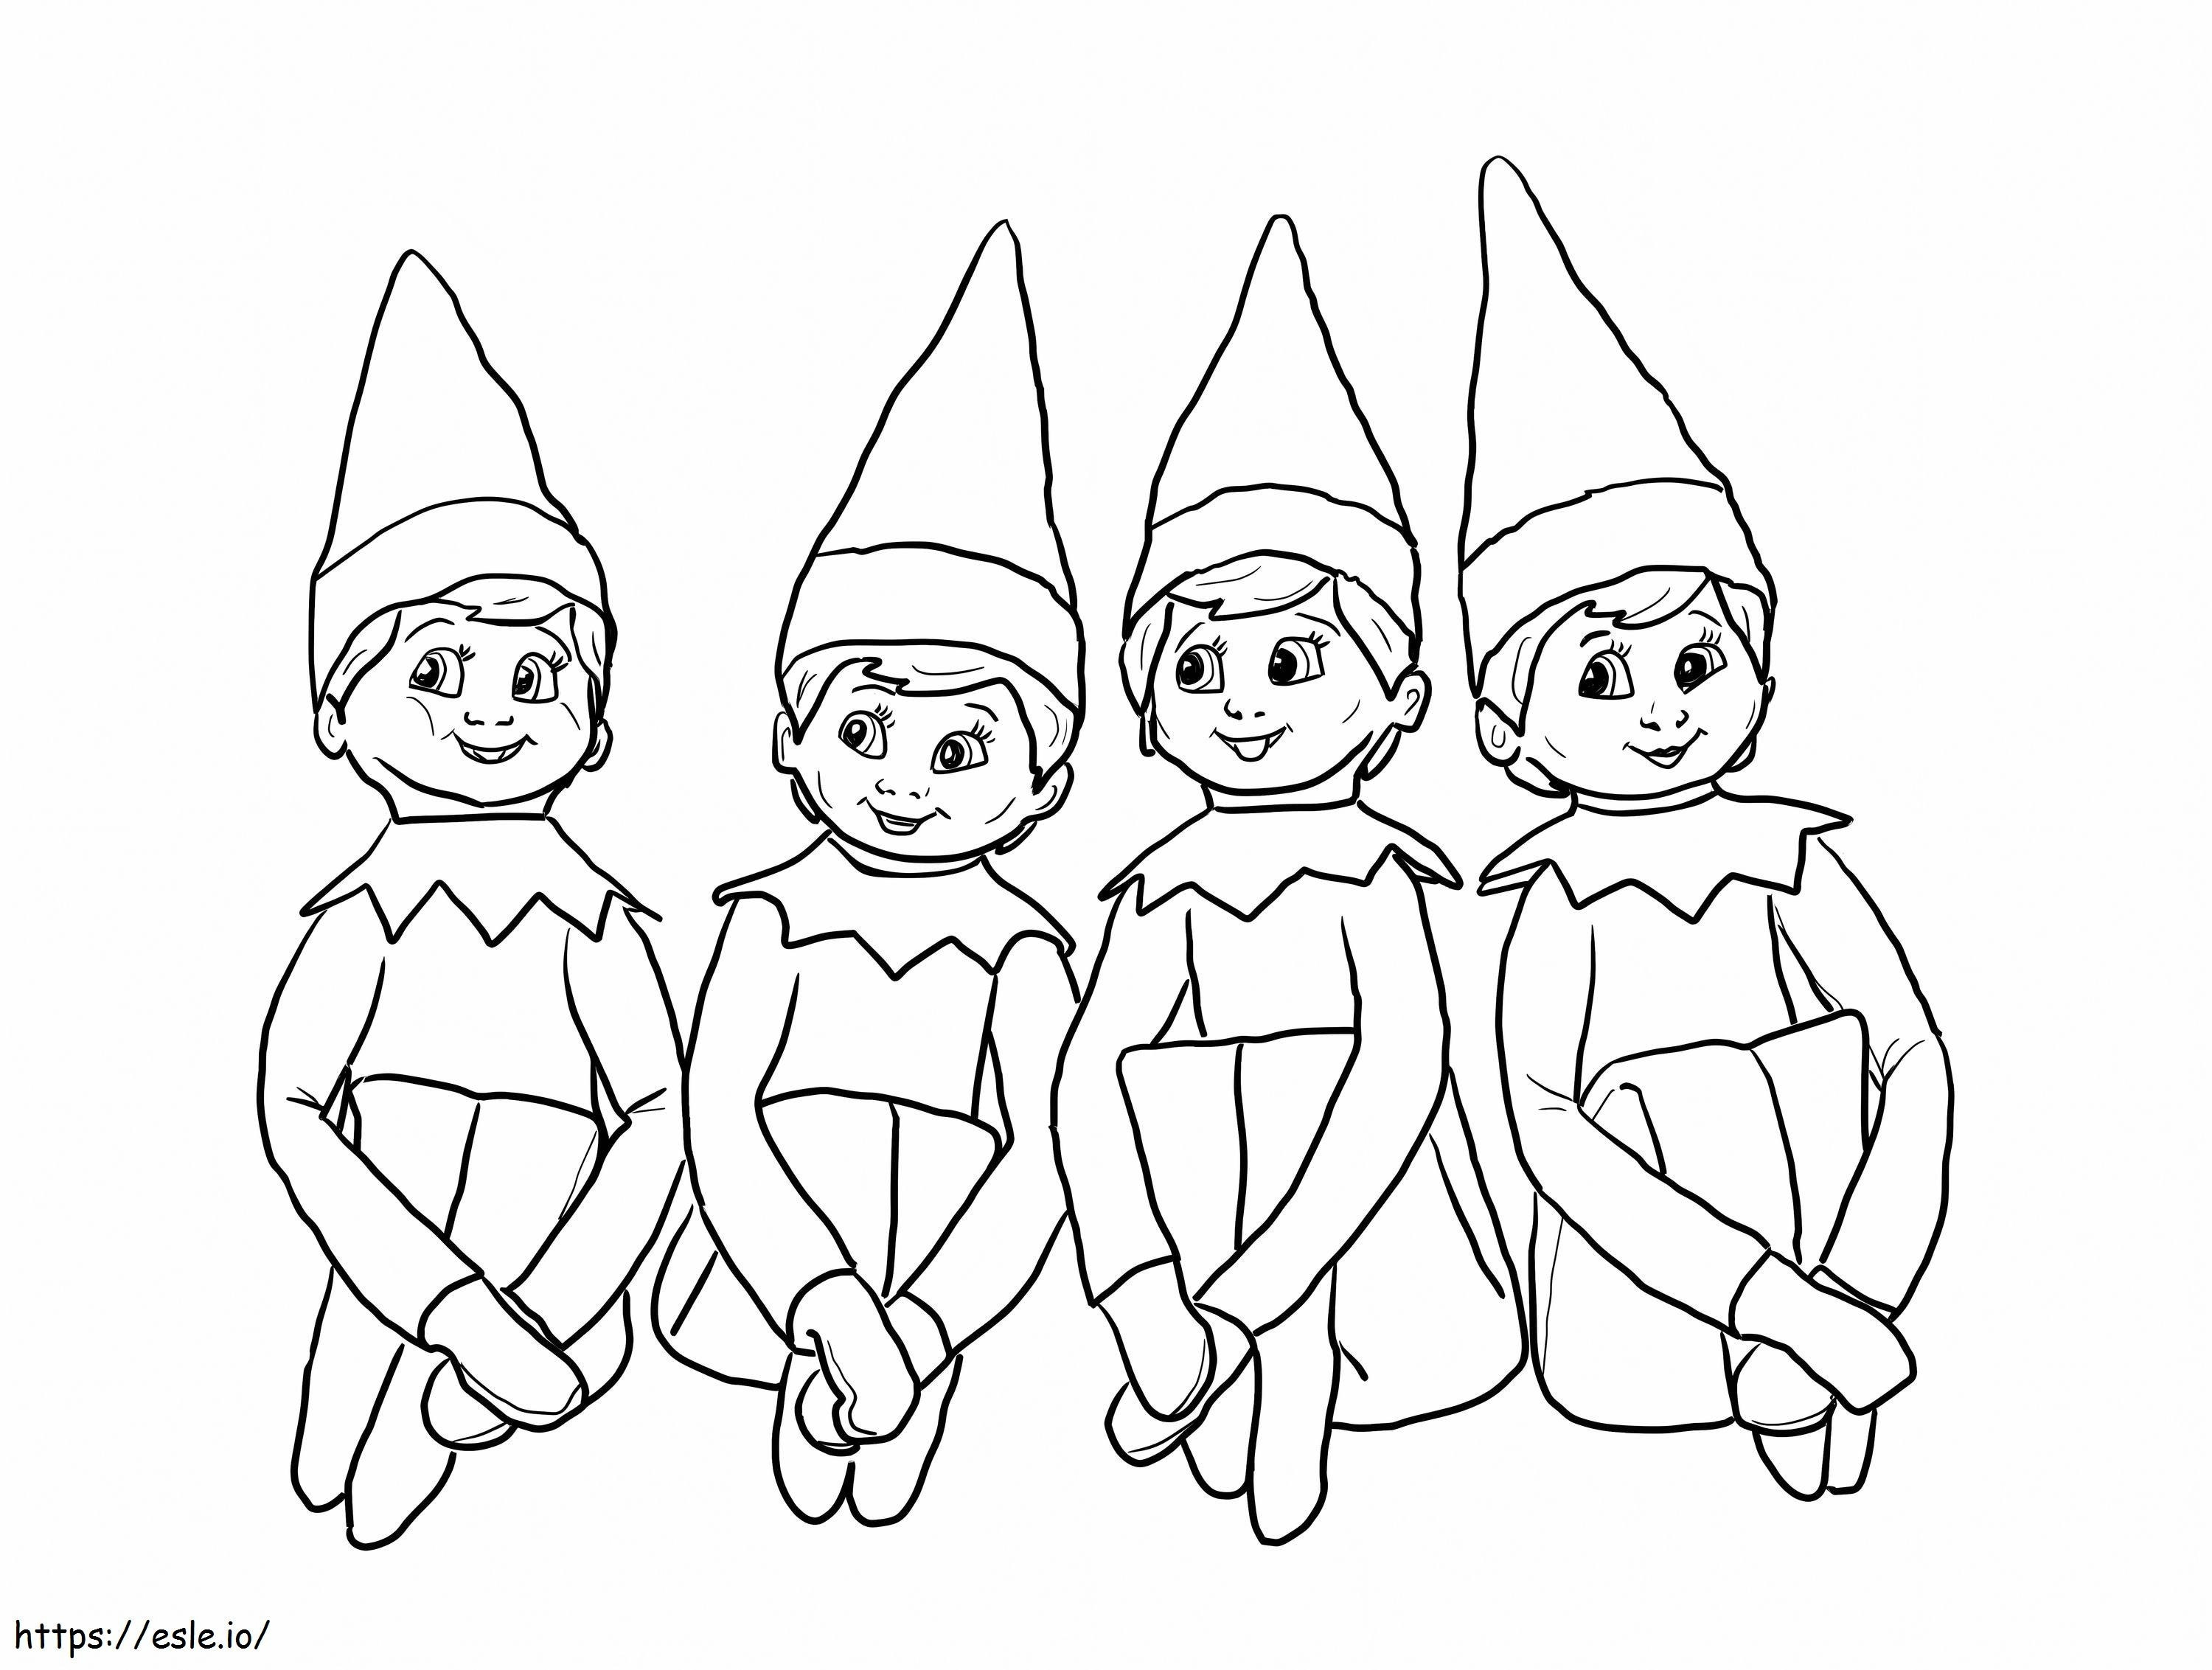 Elves On The Shelf 1 coloring page